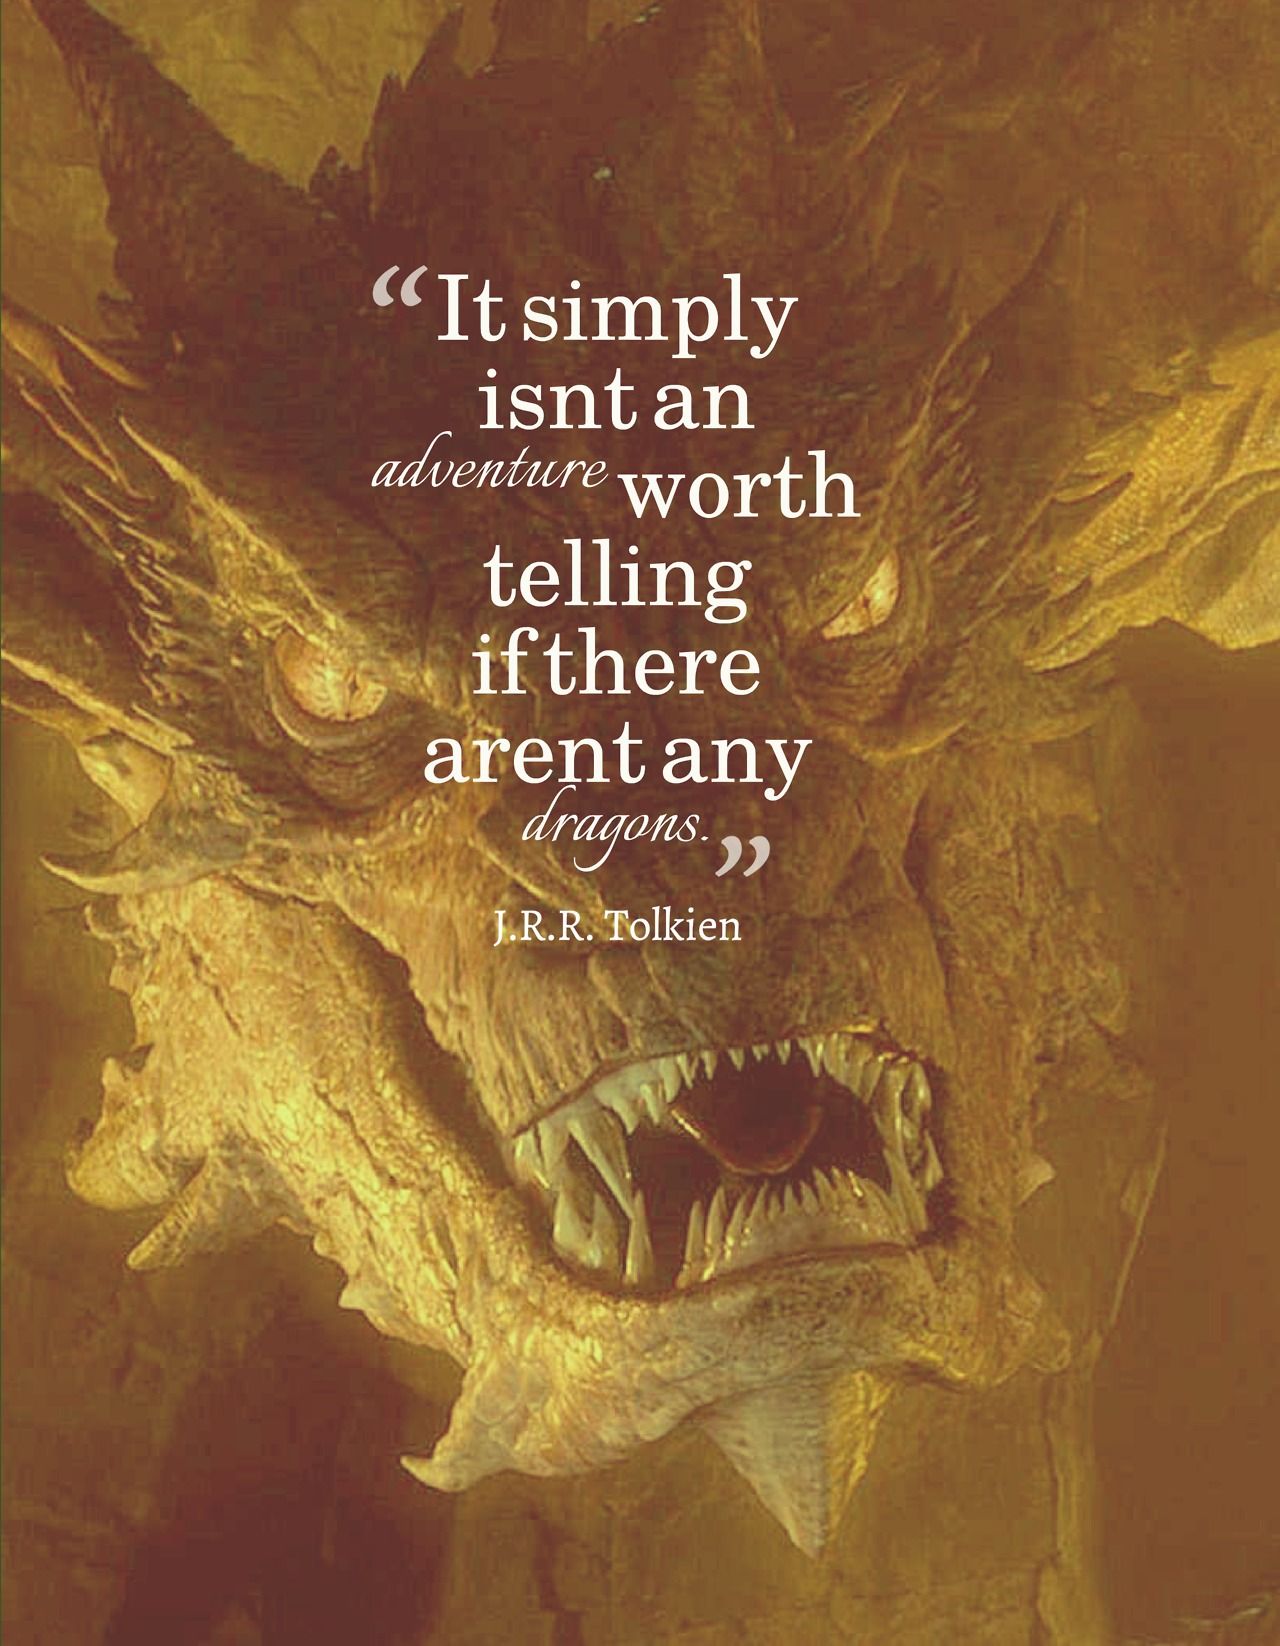 dragon quotes - It simply isnt an adventure worth telling if there arent any dragons. J.R.R. Tolkien